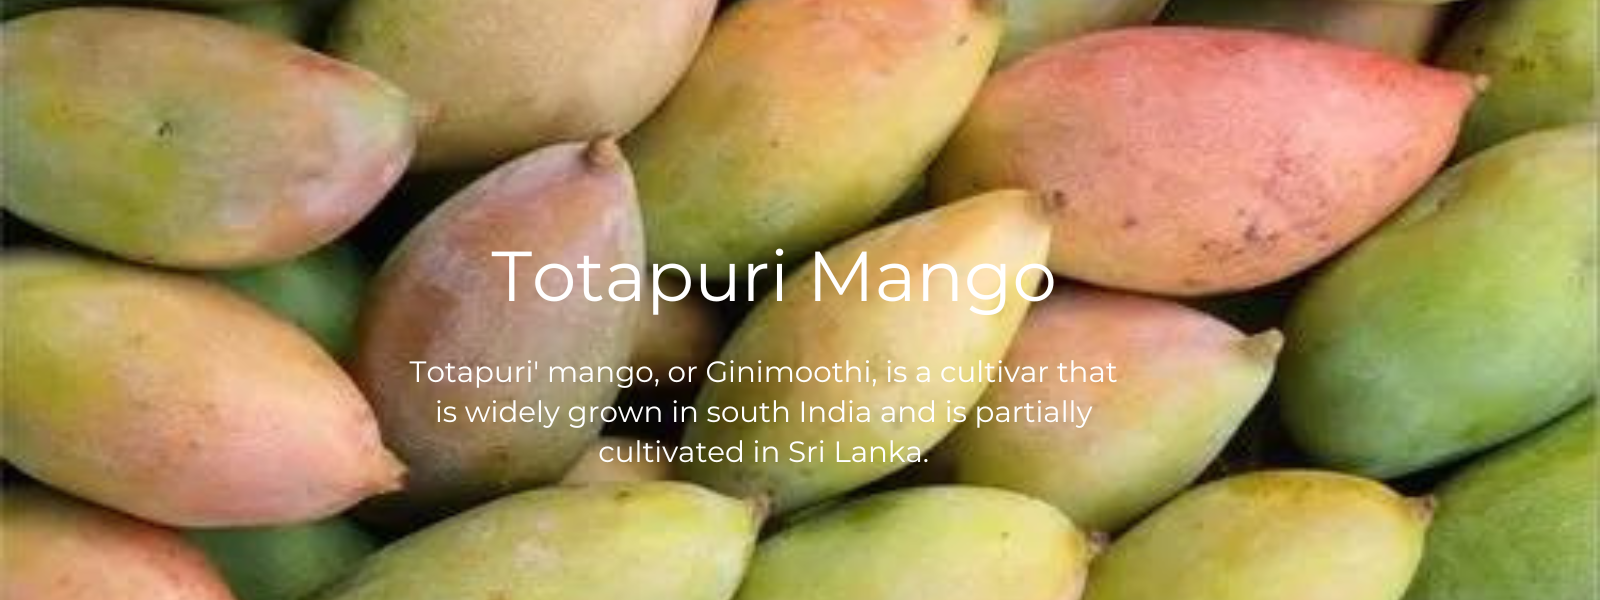 Totapuri Mango - Health Benefits, Uses and Important Facts